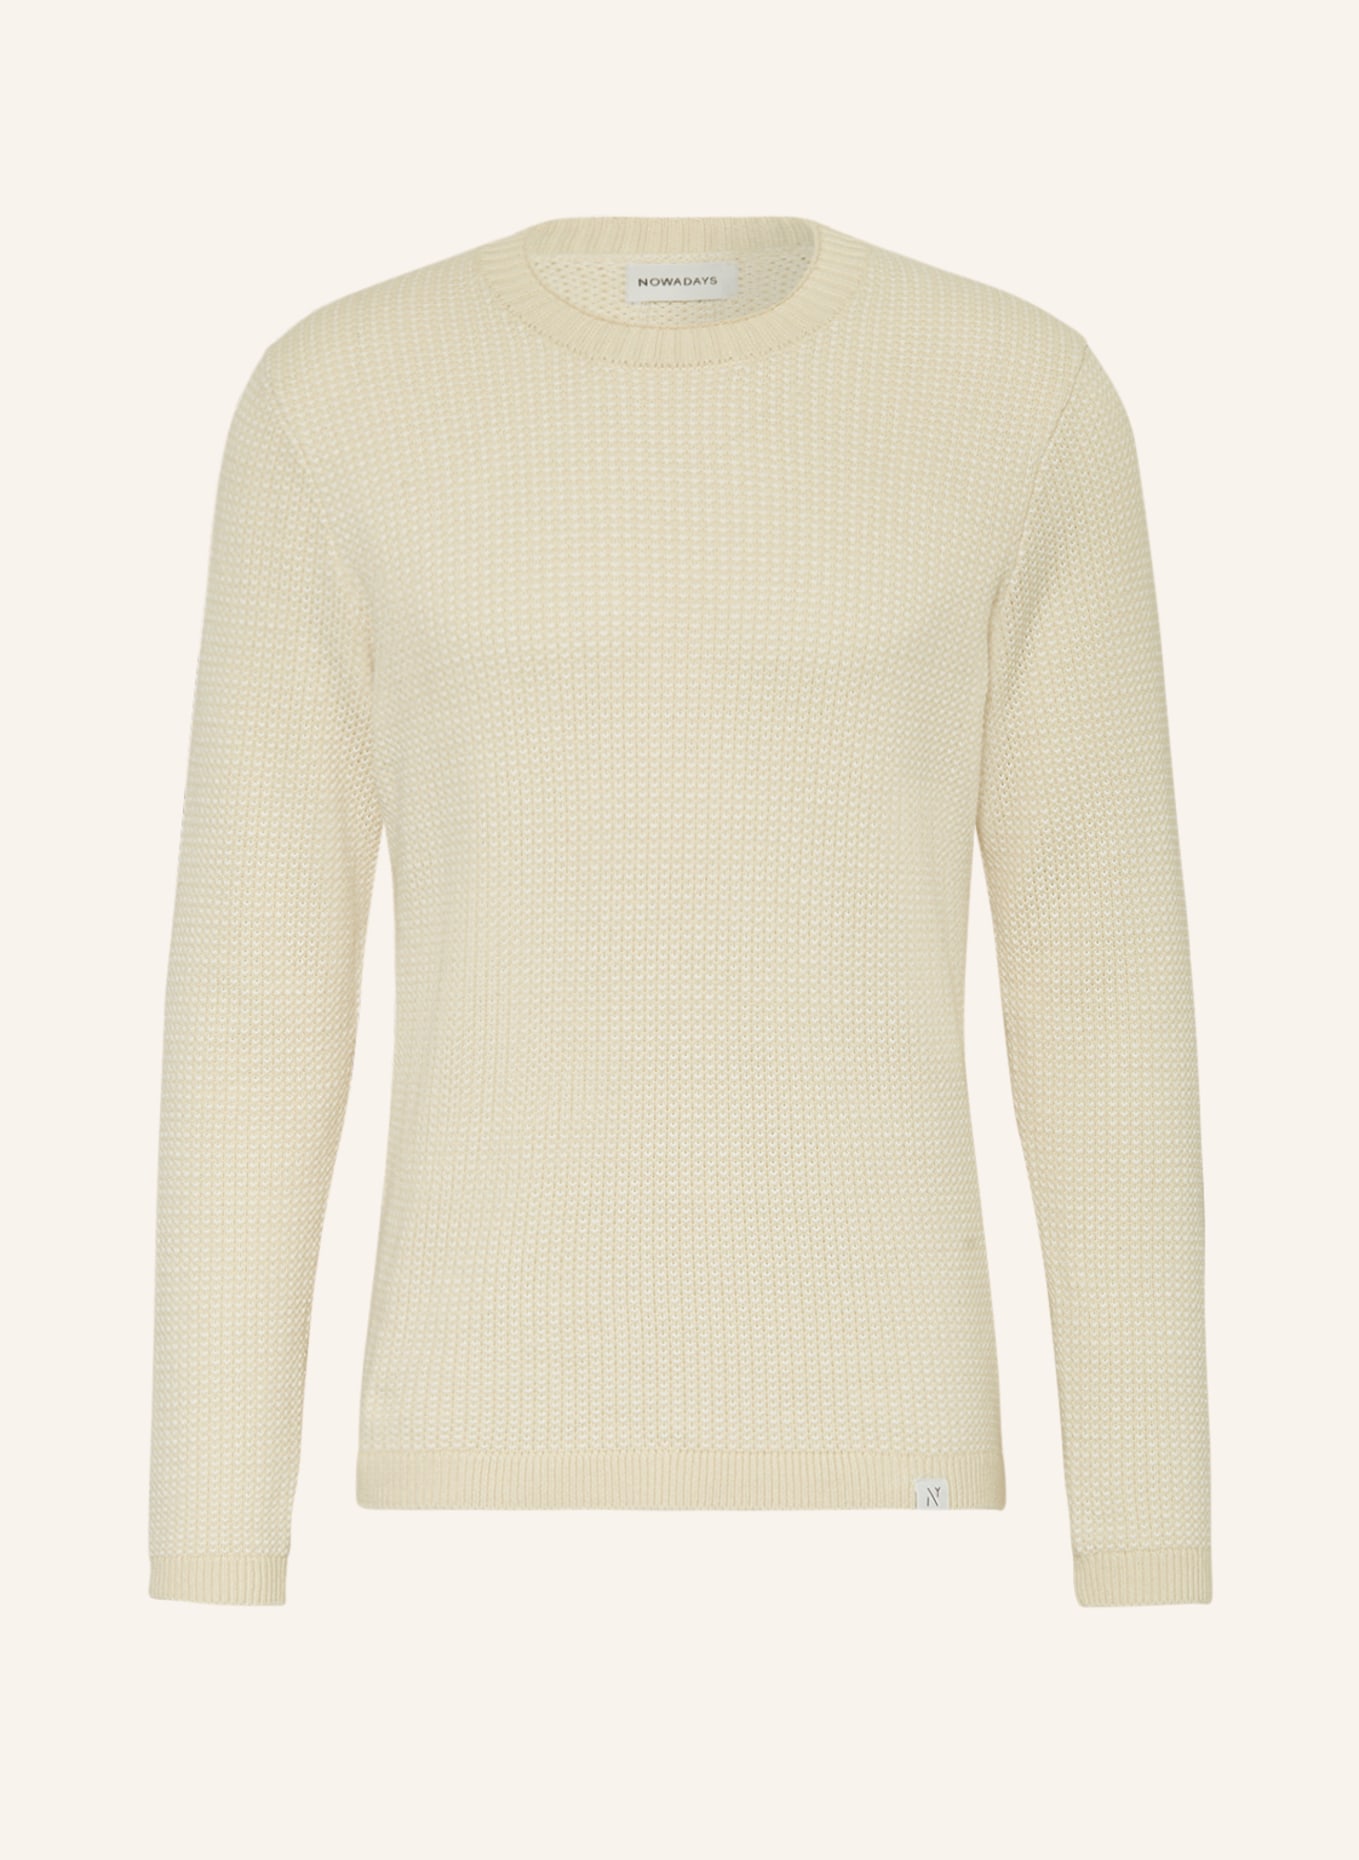 NOWADAYS Sweater, Color: BEIGE/ WHITE (Image 1)